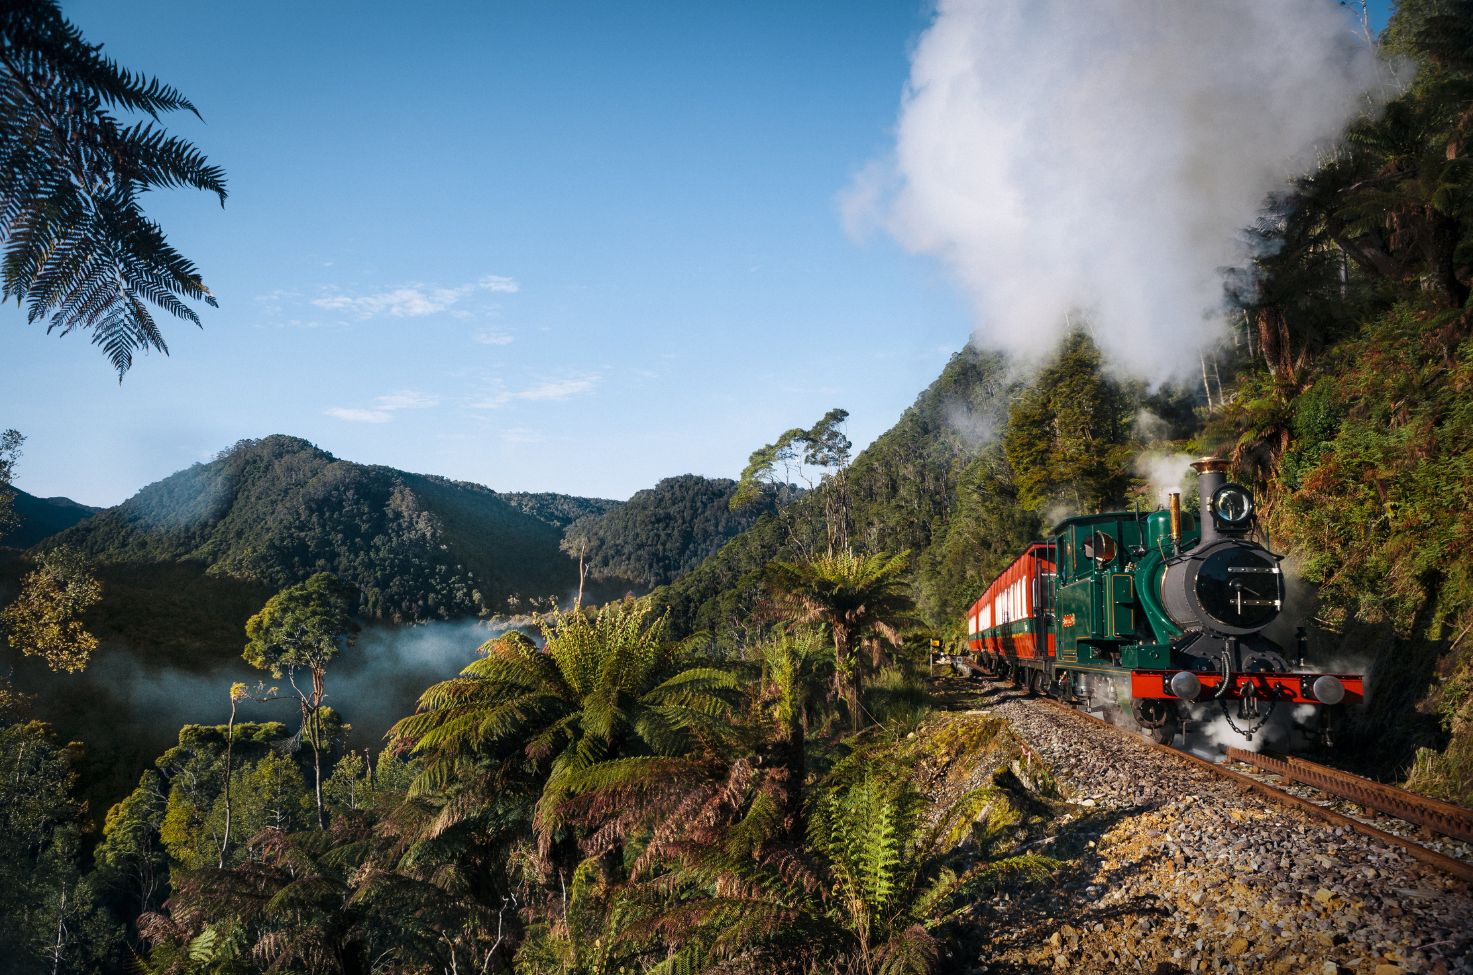 Train puffing steam on the ridge of a mountainside with lush greenery surrounding the terrain